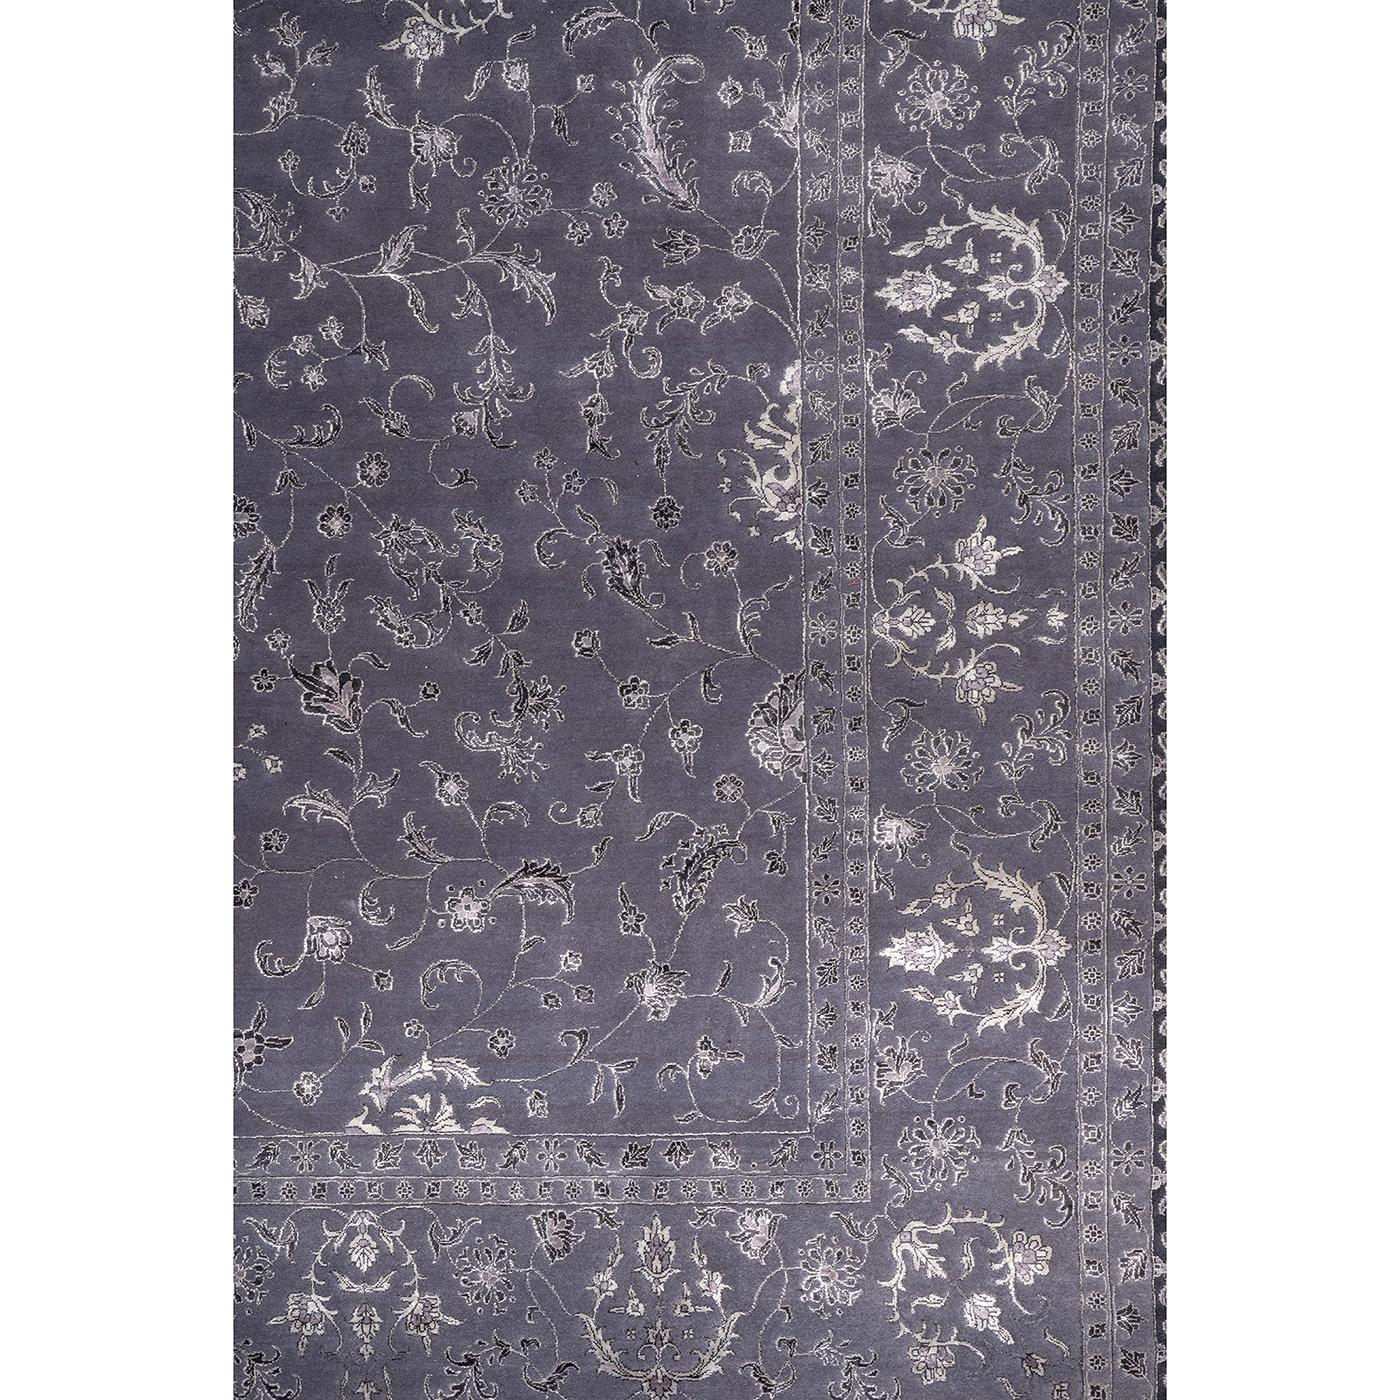 This majestic rug is handwoven in India of extra fine New Zealand wool and viscose employs the traditional Iranian knot technique (600 knots per square meter). A superb piece that will elevate the style of any room, the masterfully detailed classic